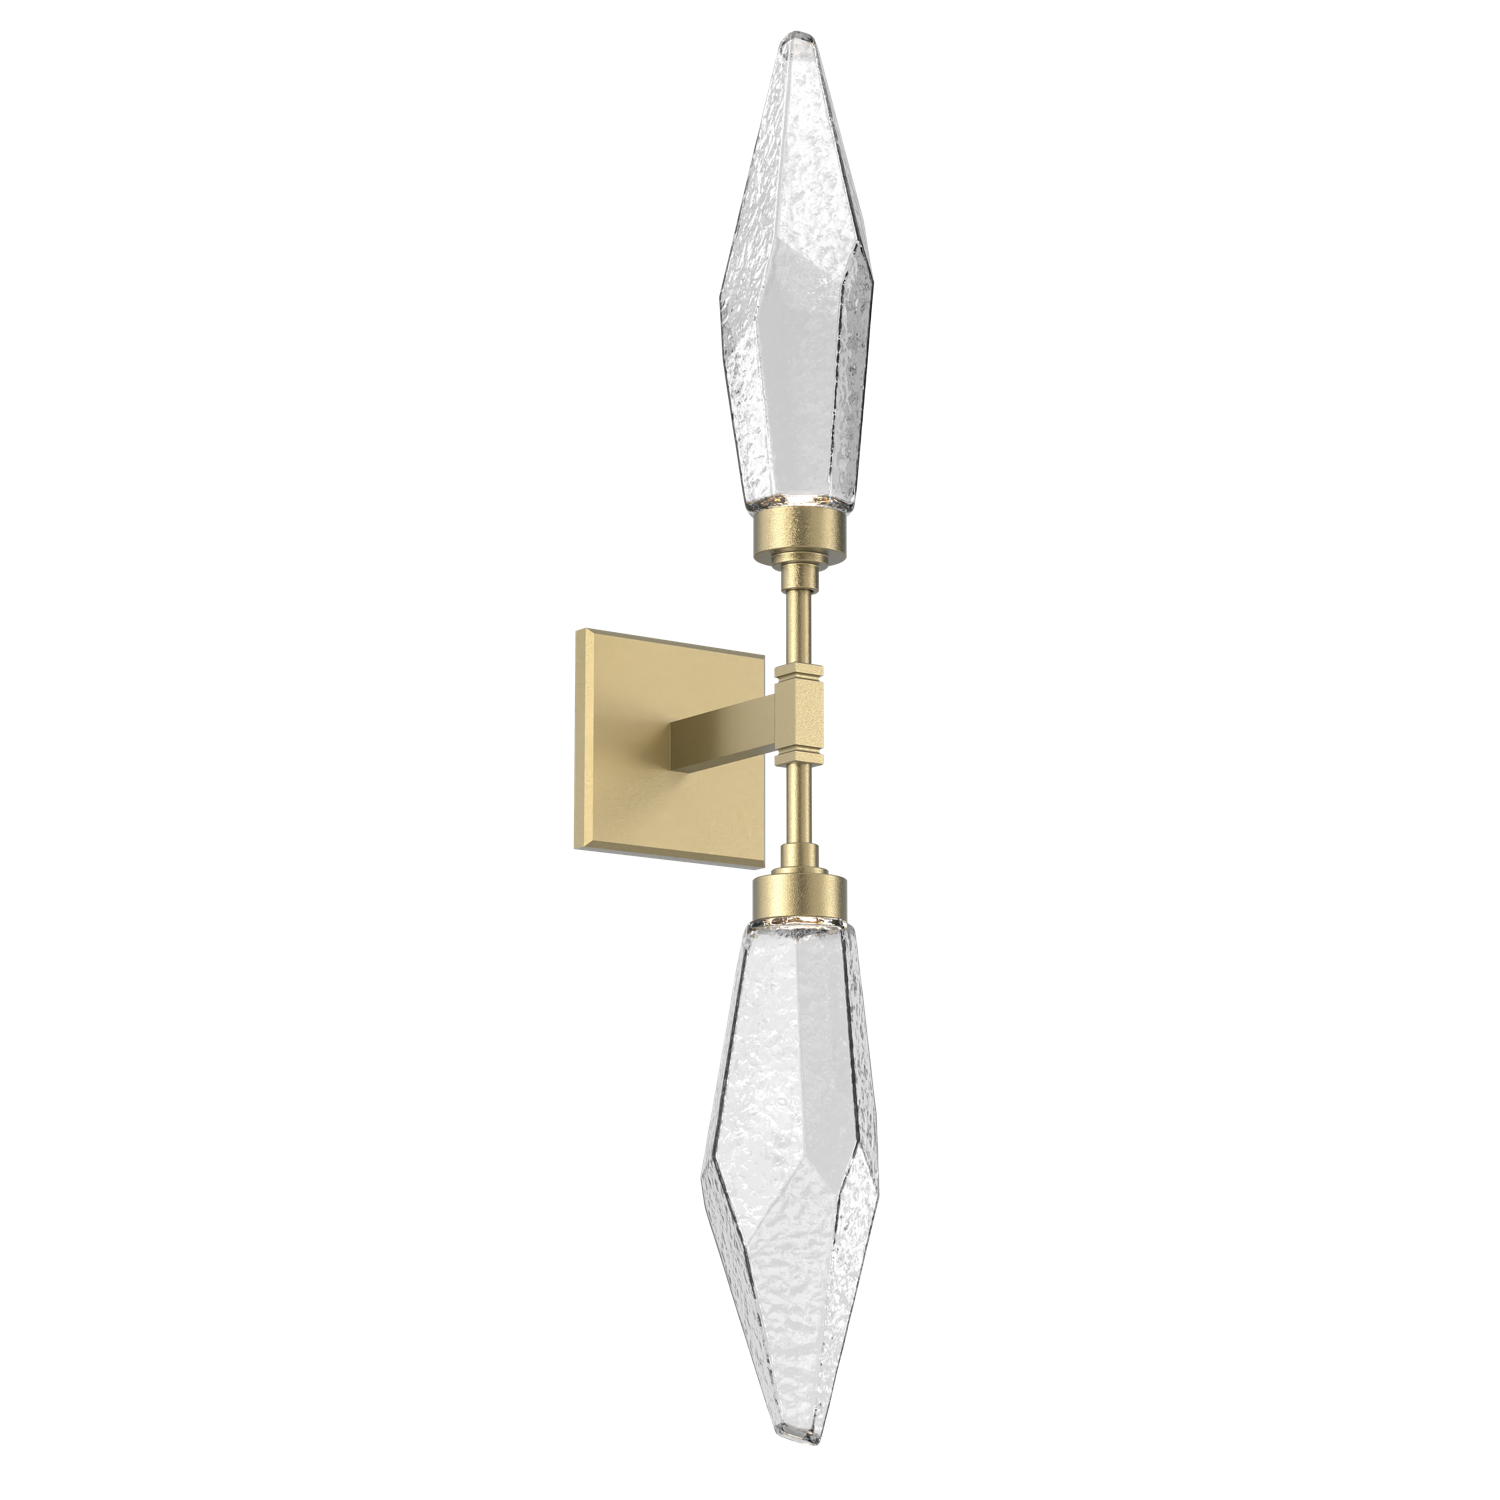 IDB0050-02-GB-CC-Hammerton-Studio-Rock-Crystal-wall-sconce-with-gilded-brass-finish-and-clear-glass-shades-and-LED-lamping